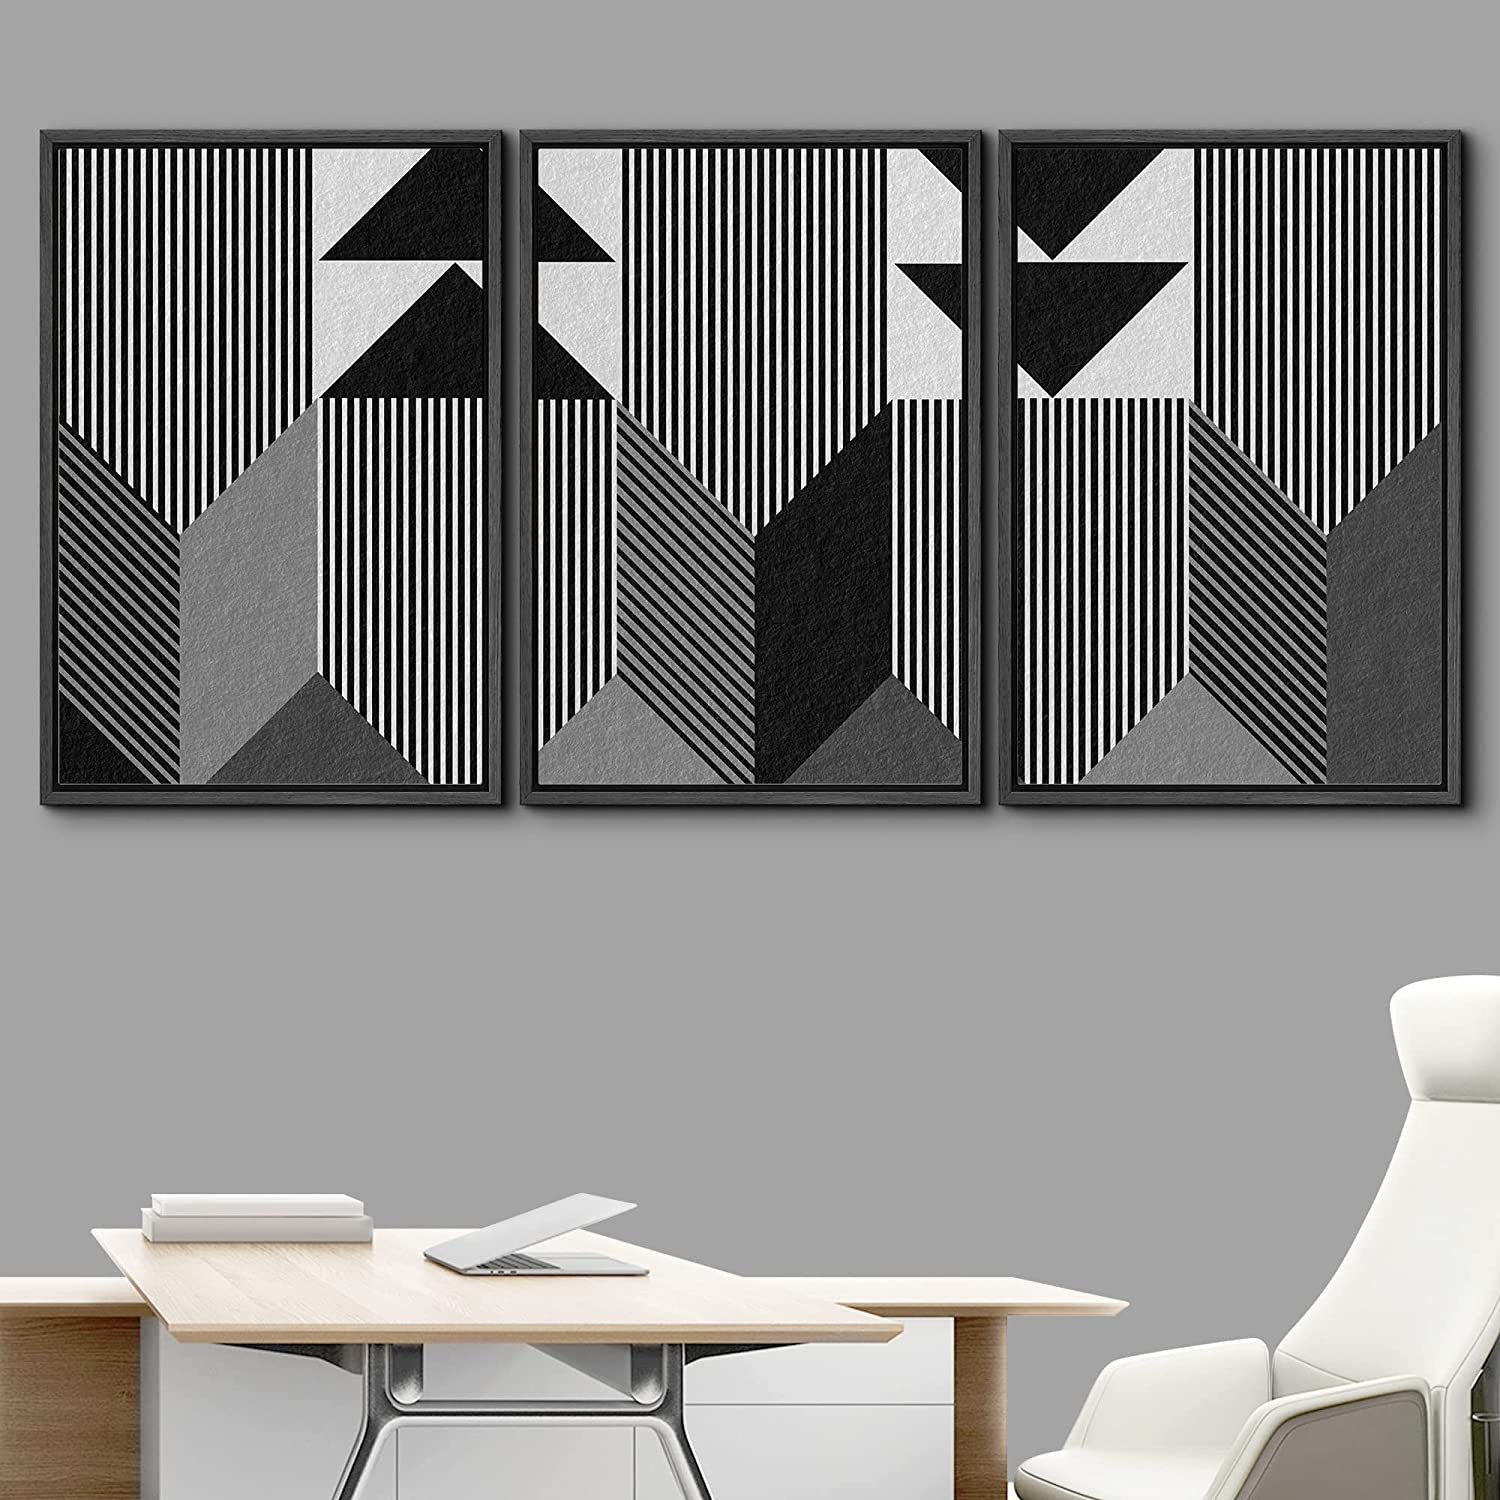 Black And White 3D Line Illusion Drawing Geometric Pattern